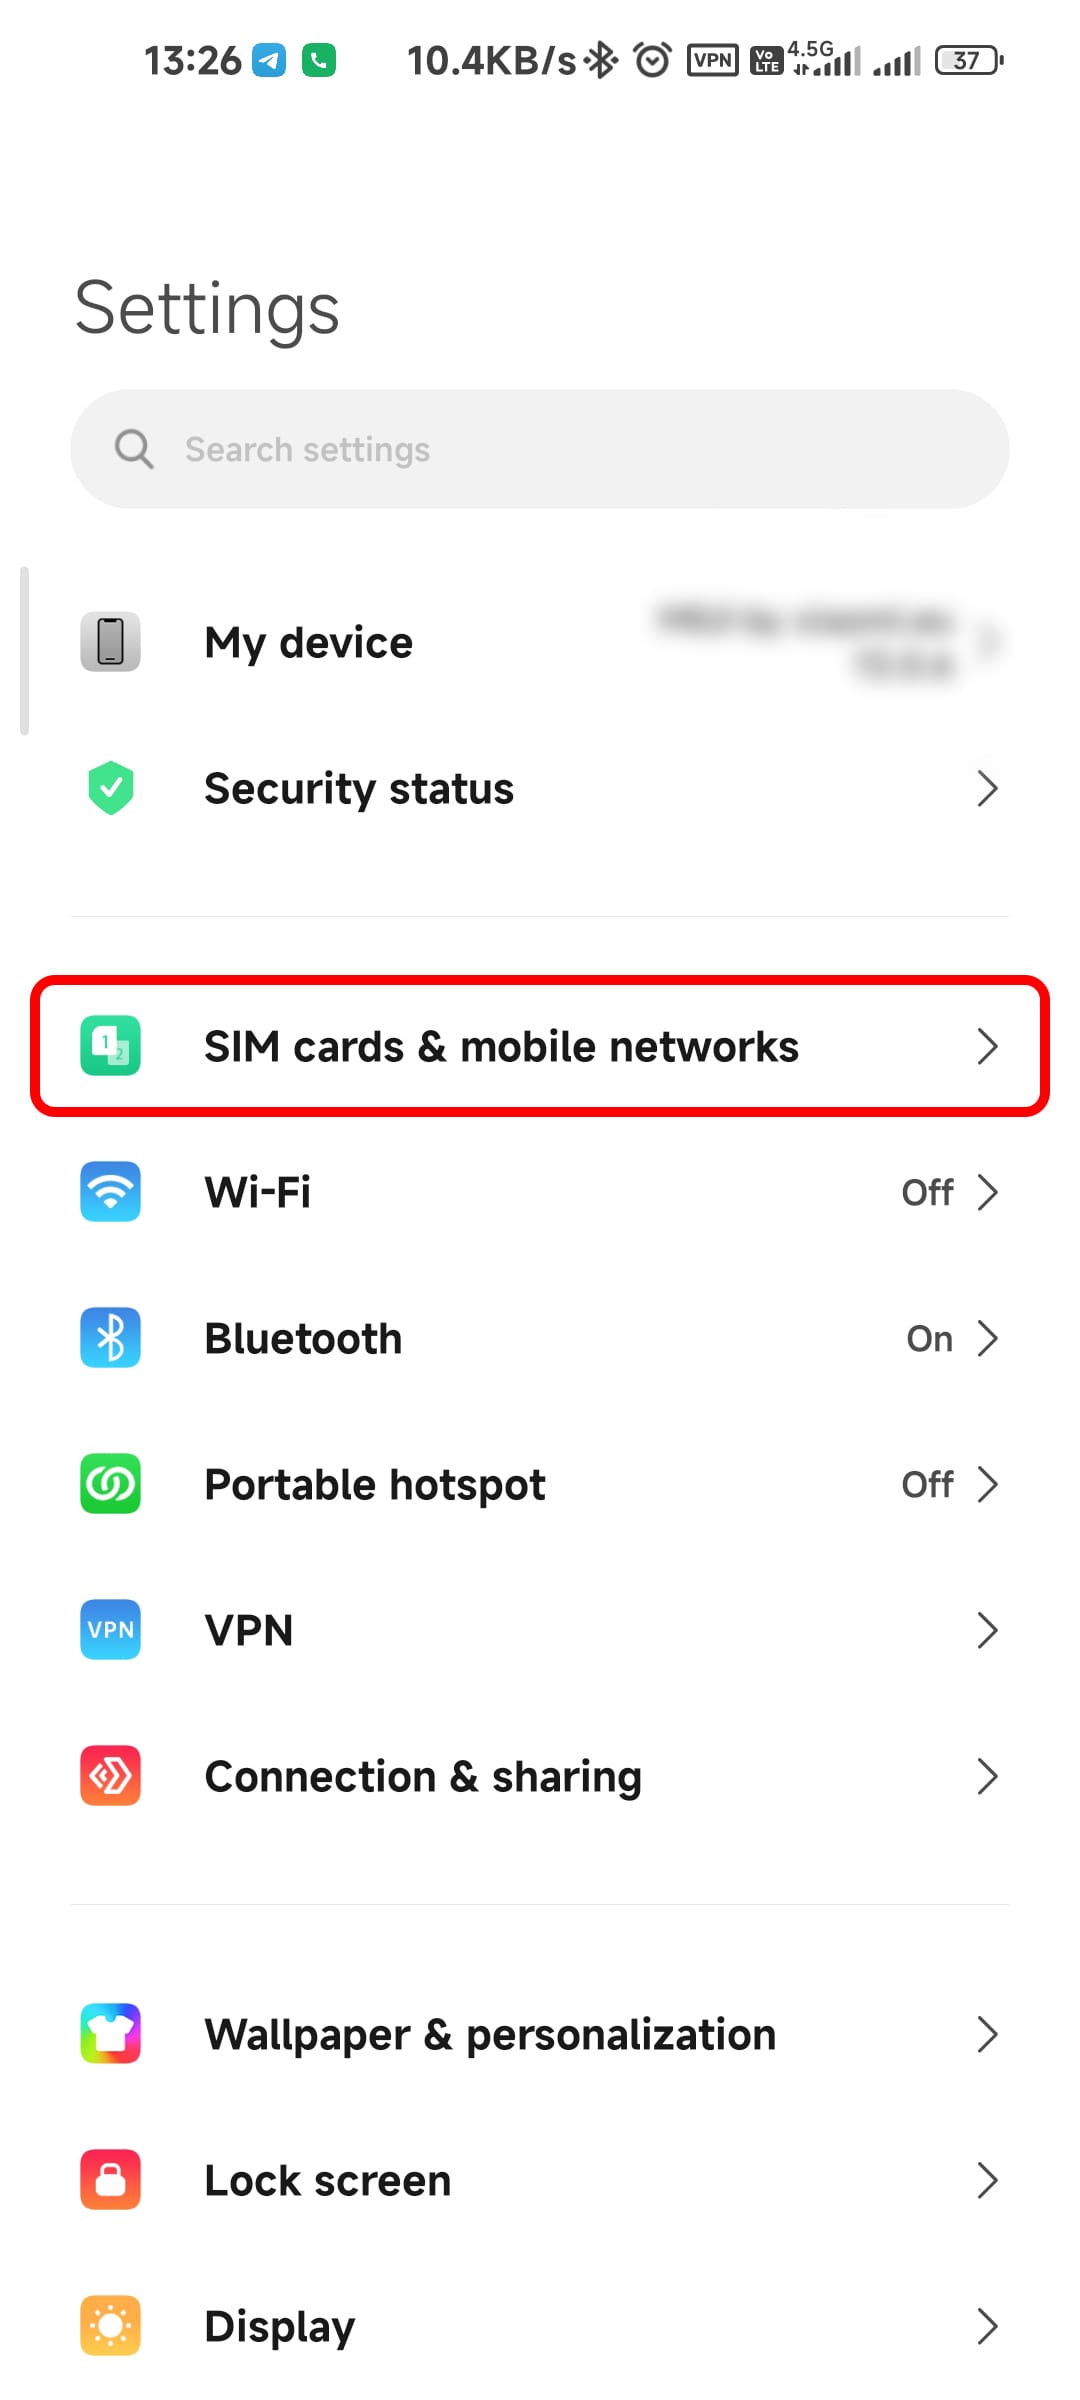 Select SIM cards & mobile networks option